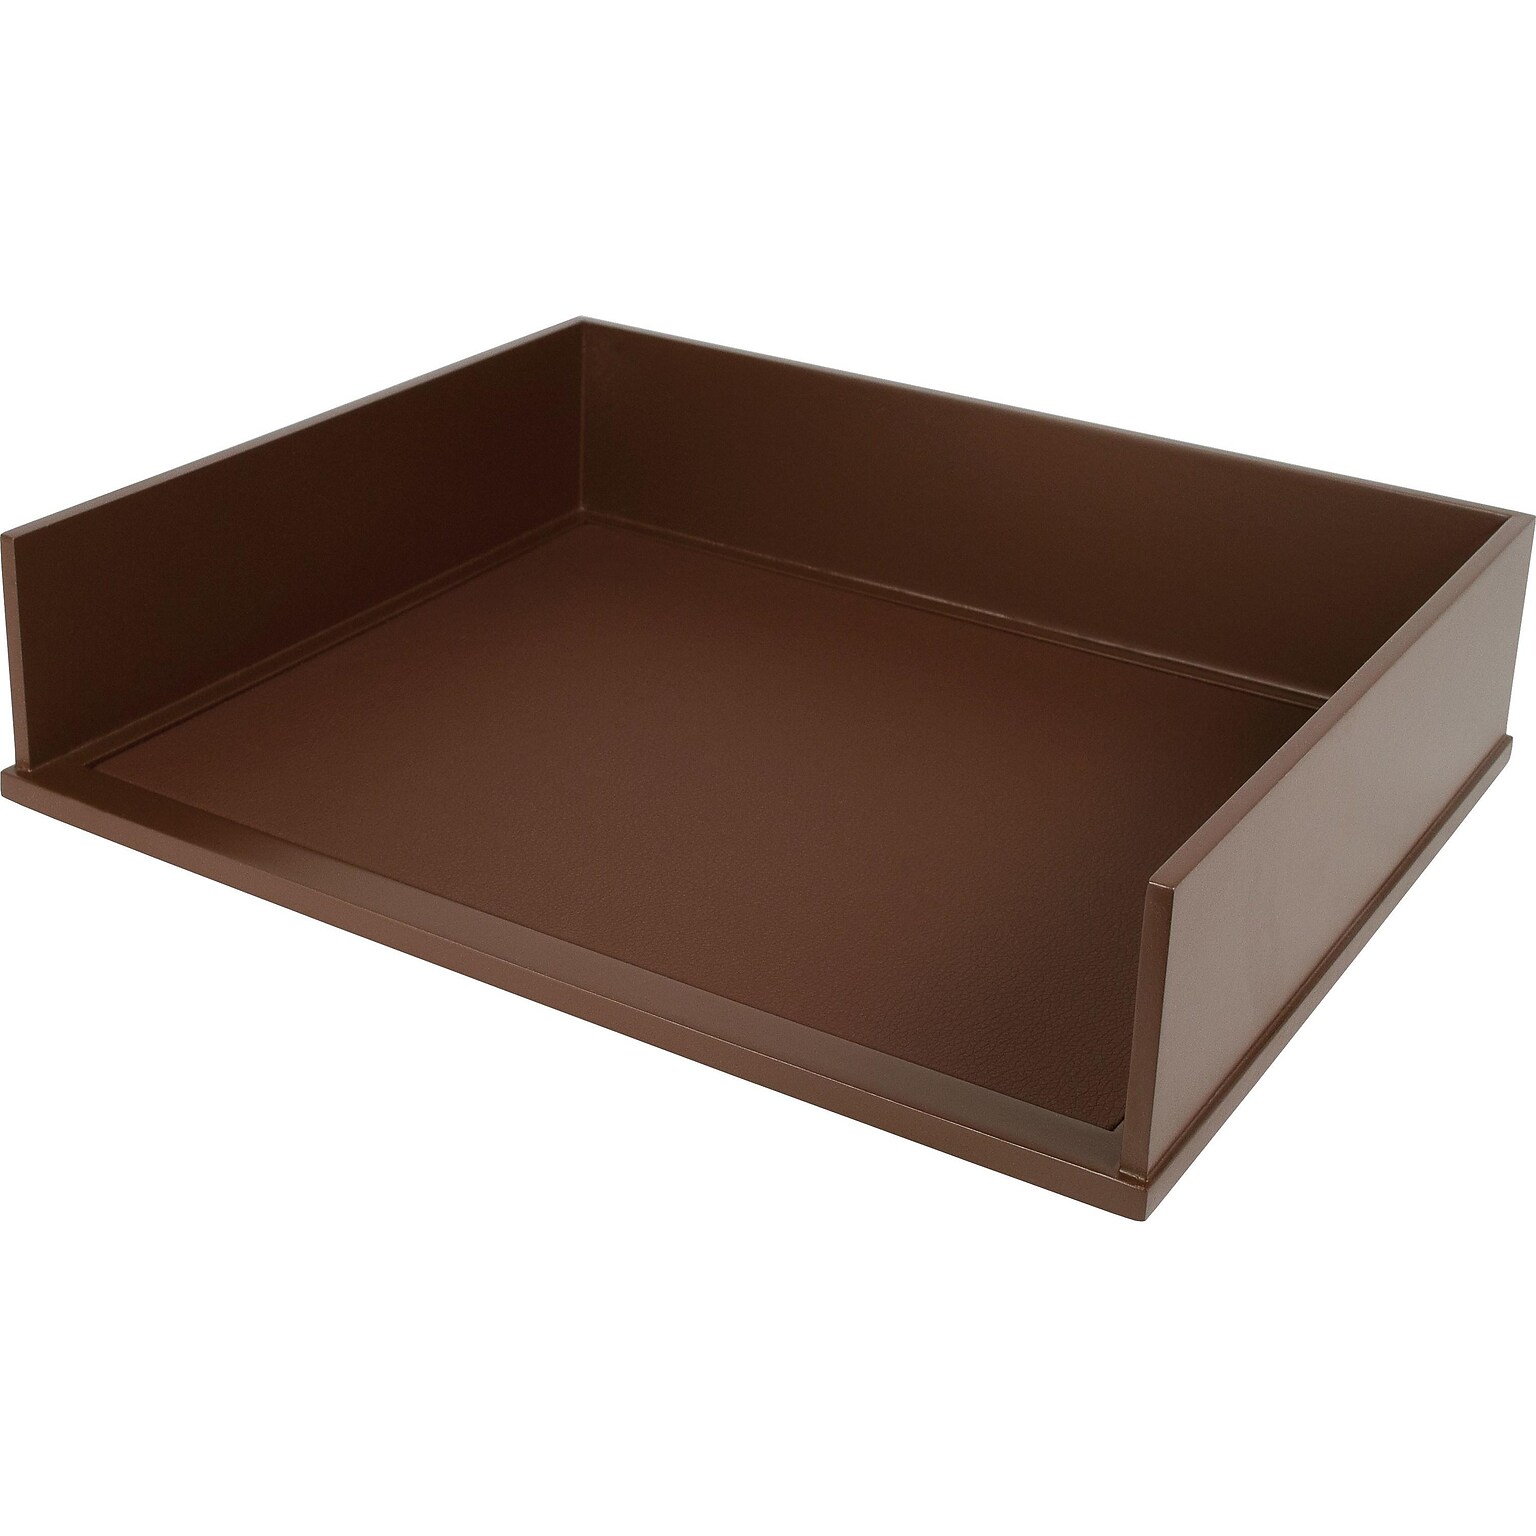 Victor Technology Technology Wooden Letter Tray, Mocha Brown (B1154)